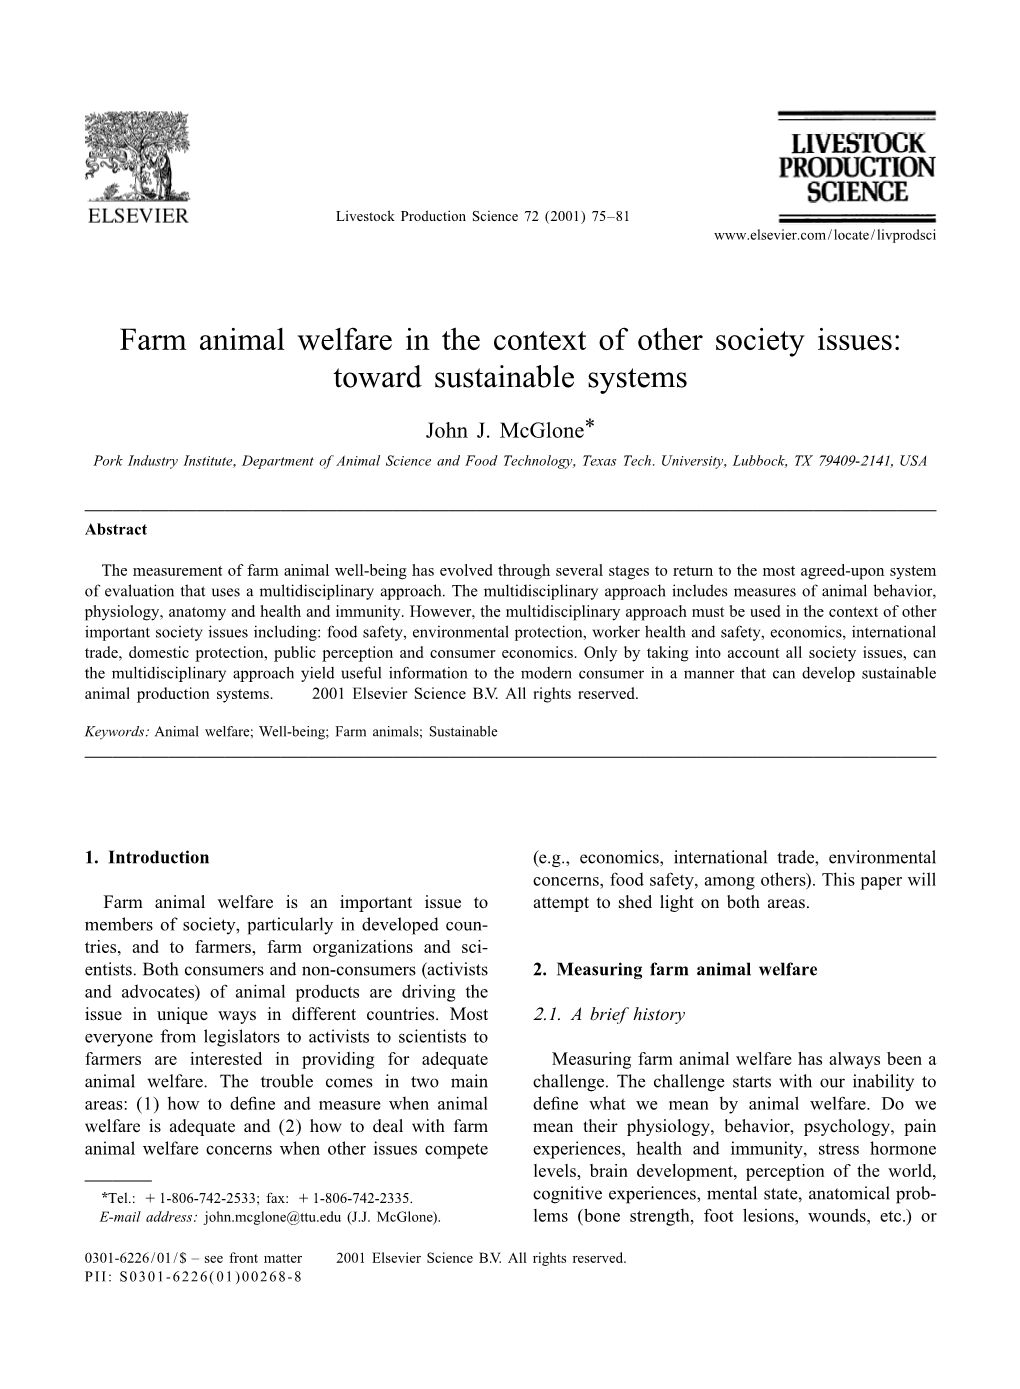 Farm Animal Welfare in the Context of Other Society Issues: Toward Sustainable Systems